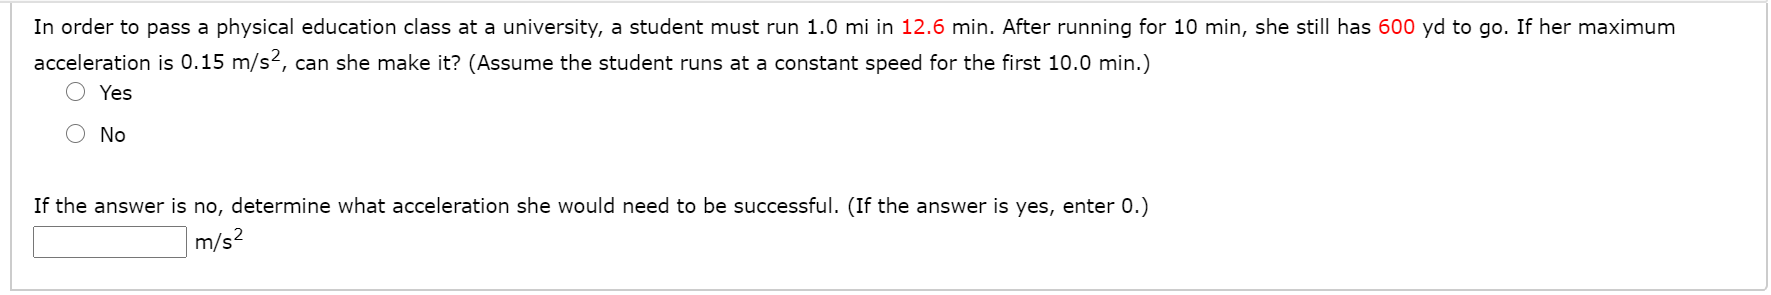 In order to pass a physical education class at a university, a student must run 1.0 mi in 12.6 min. After running for 10 min, she still has 600 yd to go. If her maximum
acceleration is 0.15 m/s2, can she make it? (Assume the student runs at a constant speed for the first 10.0 min.)
Yes
No
If the answer is no, determine what acceleration she would need to be successful. (If the answer is yes, enter 0.)
m/s2
